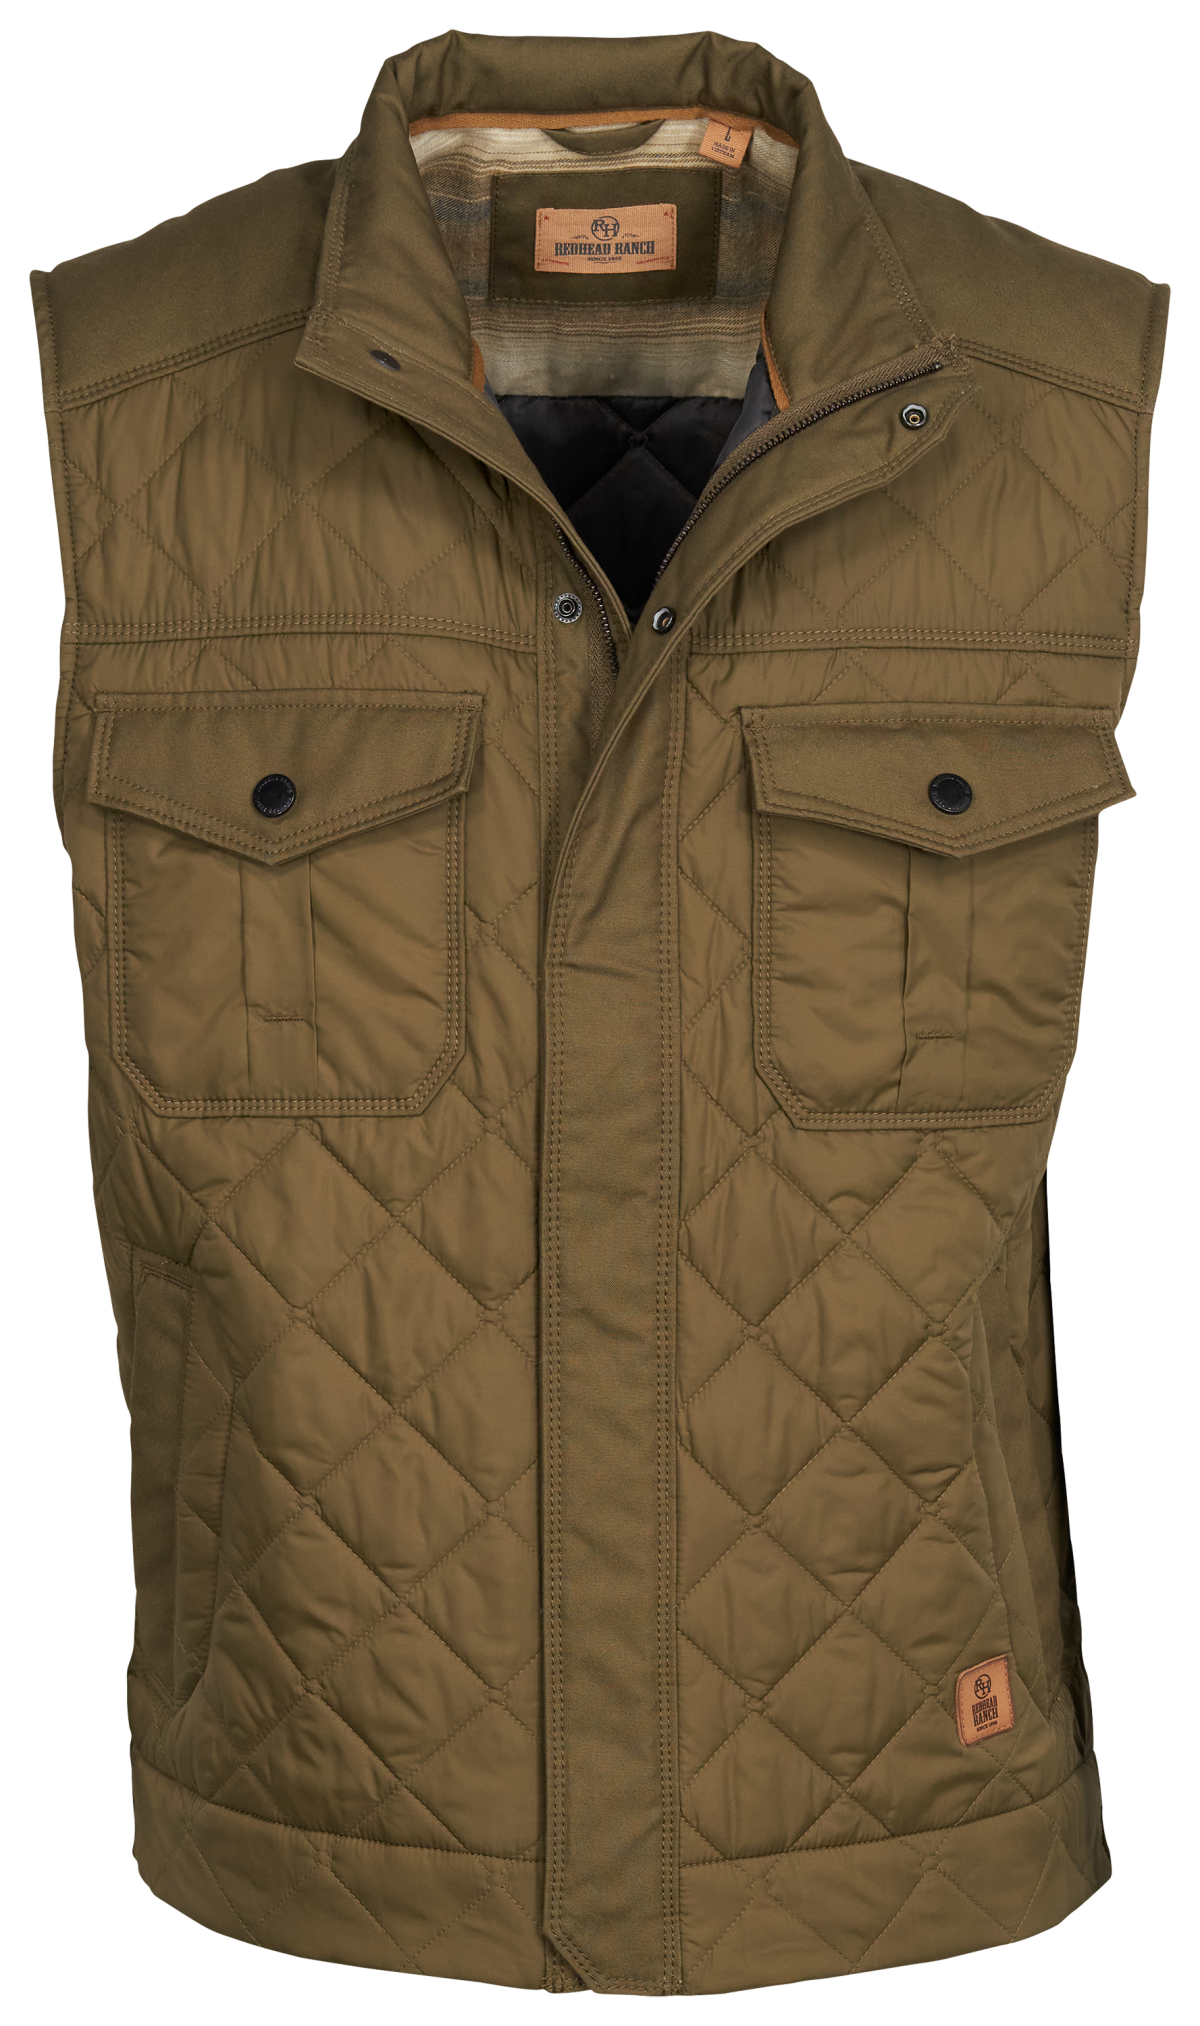 RedHead Ranch Thunder Rock Quilted Vest for Men - Beech - S